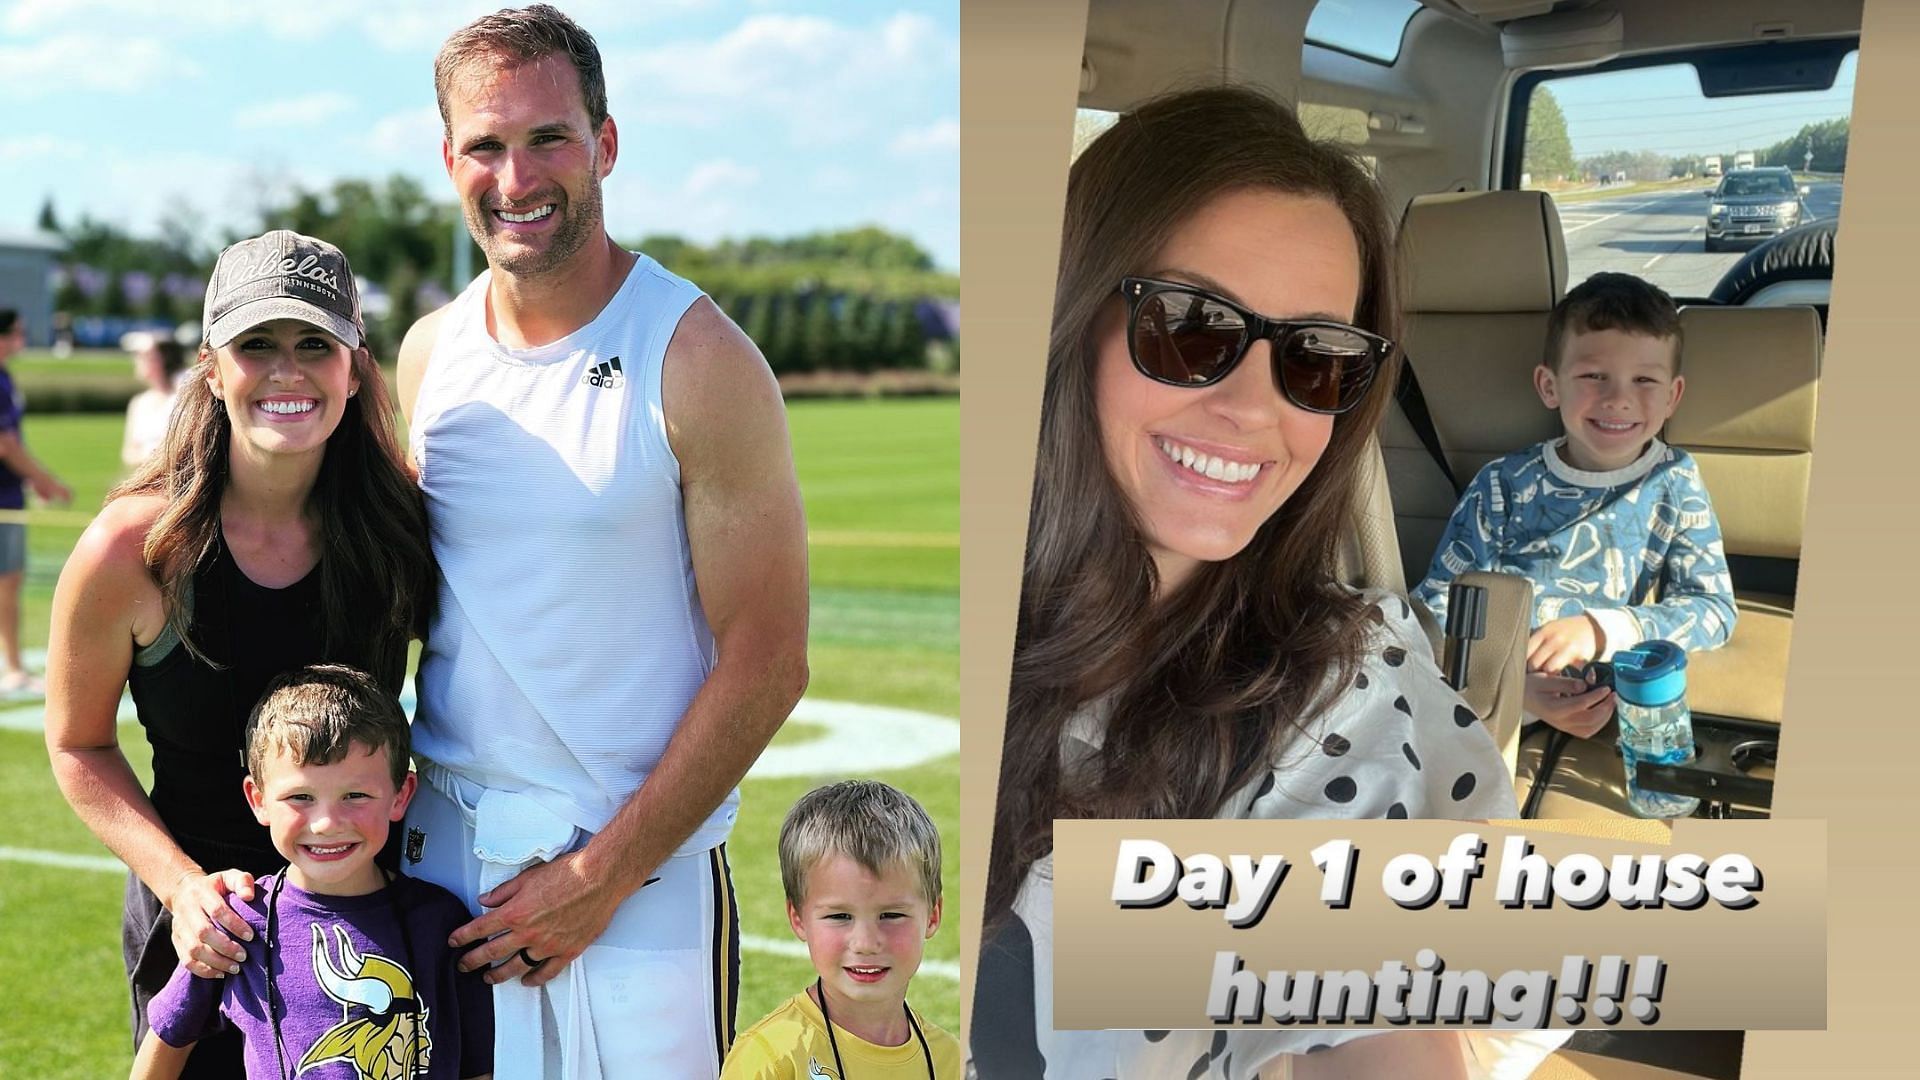 Kirk Cousins and wife Julie go house hunting after QB